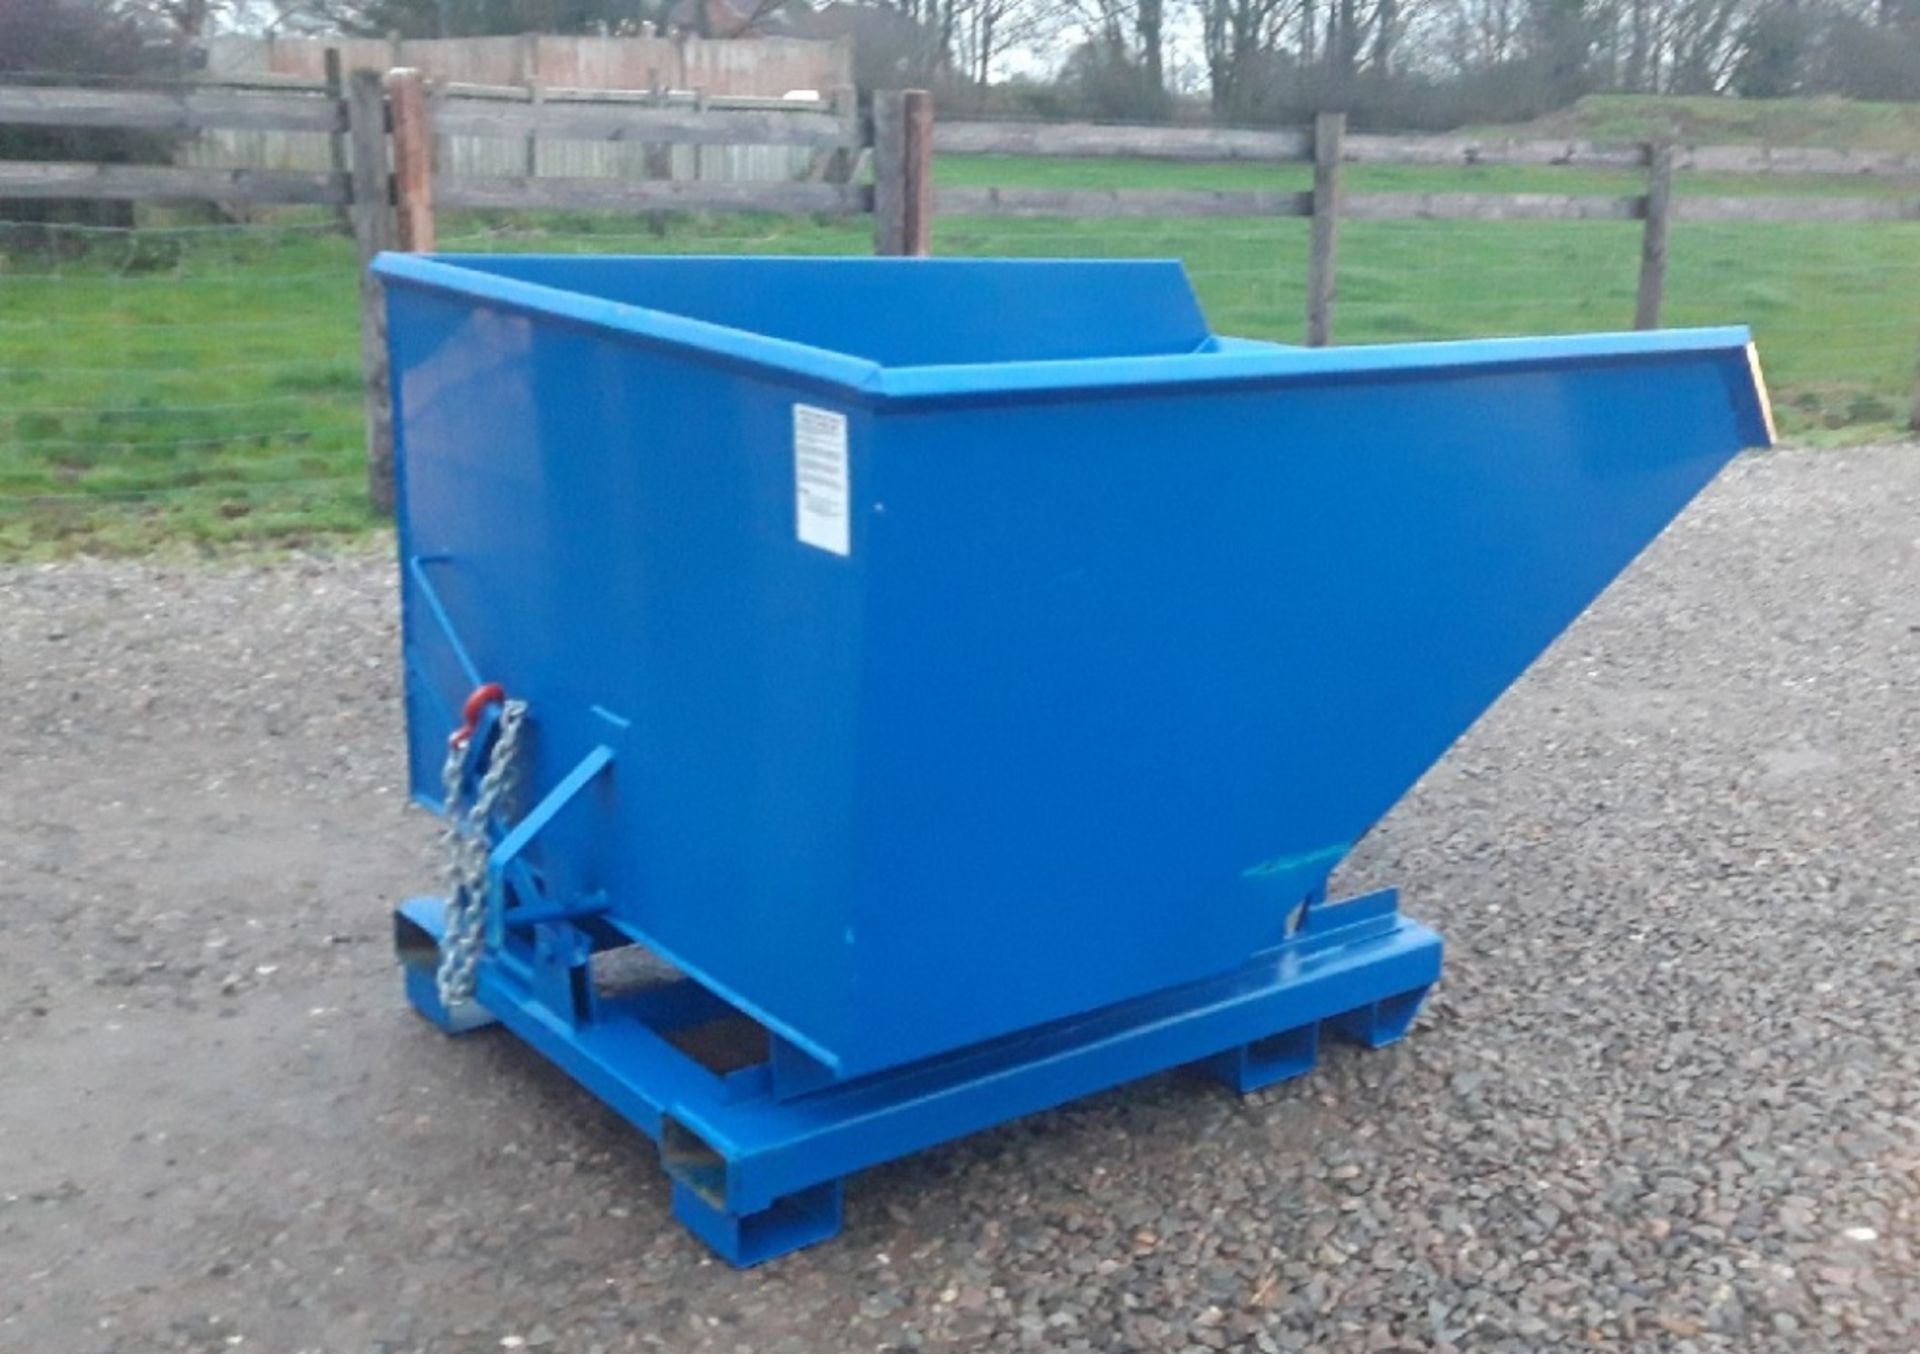 NEW GREEN 1250 LITRE TIP SKIP 4WAY ENTRY - Image 3 of 8